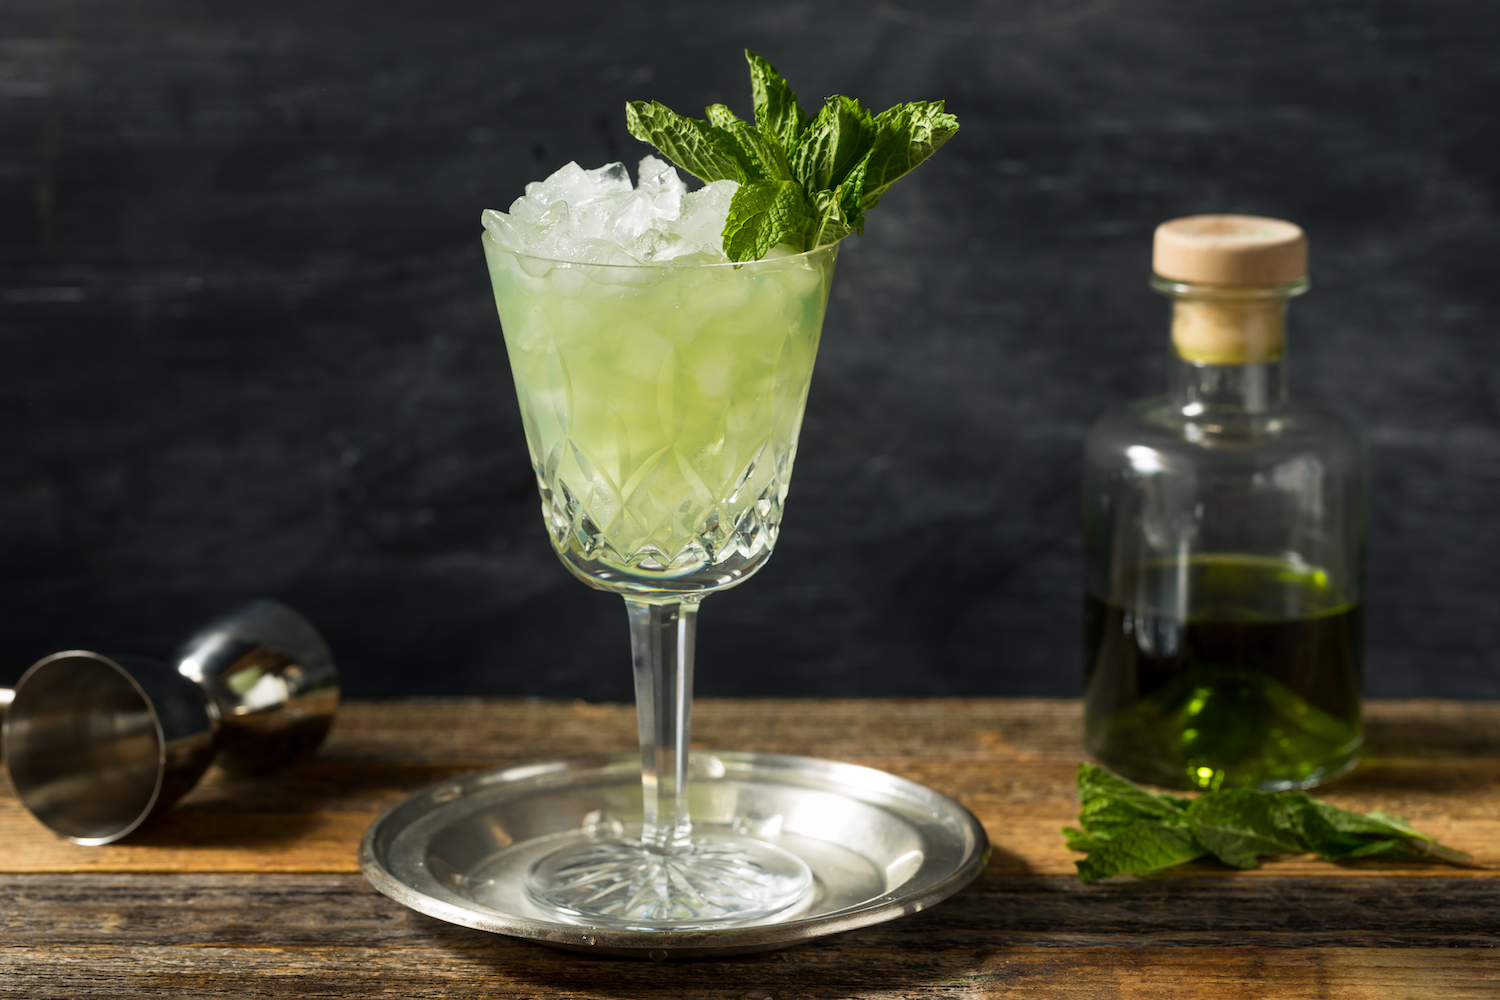 absinthe frappe cocktail garnished with mint on a silver coaster